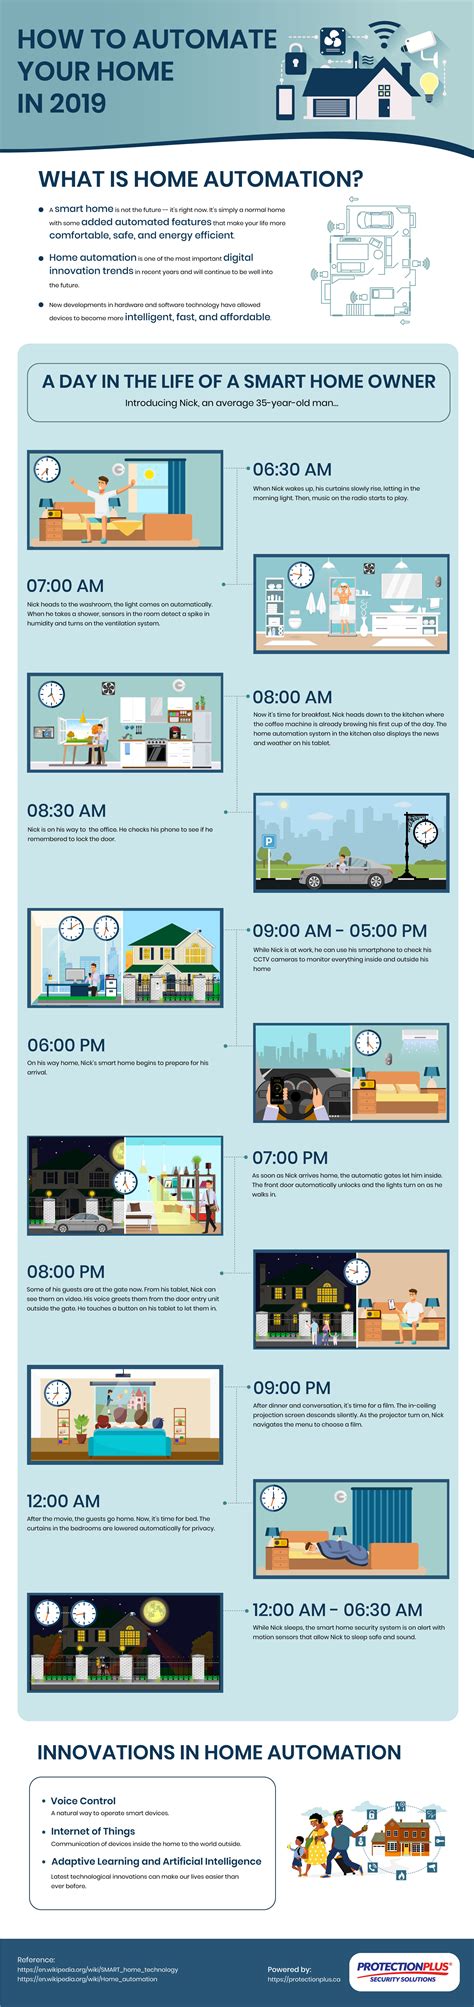 Smart Home For Automated Life In 2019 [Infographic] | Techno FAQ